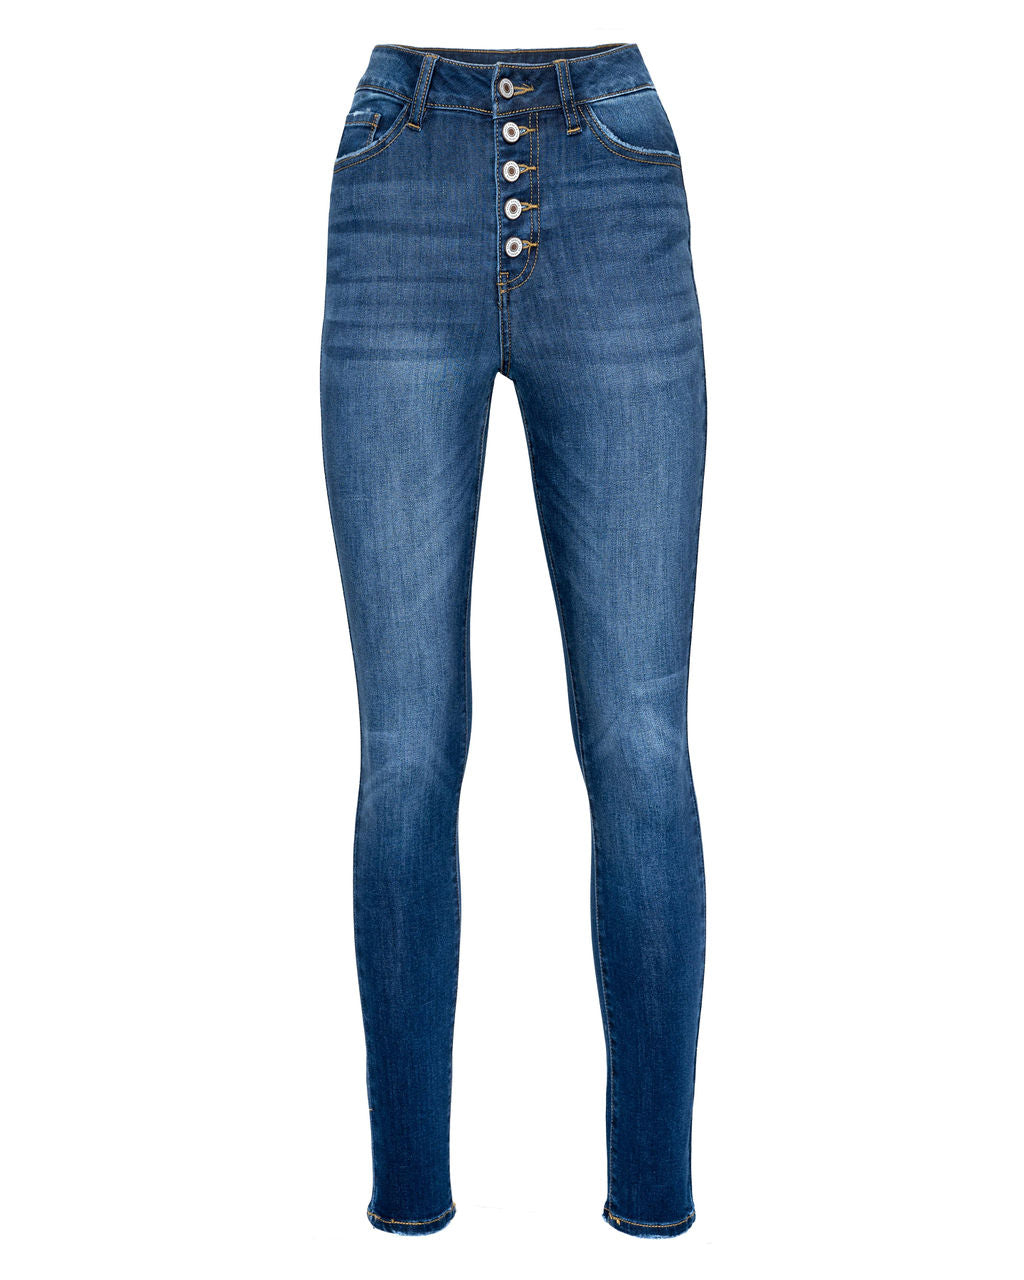 Candice High Rise Button Front Skinny